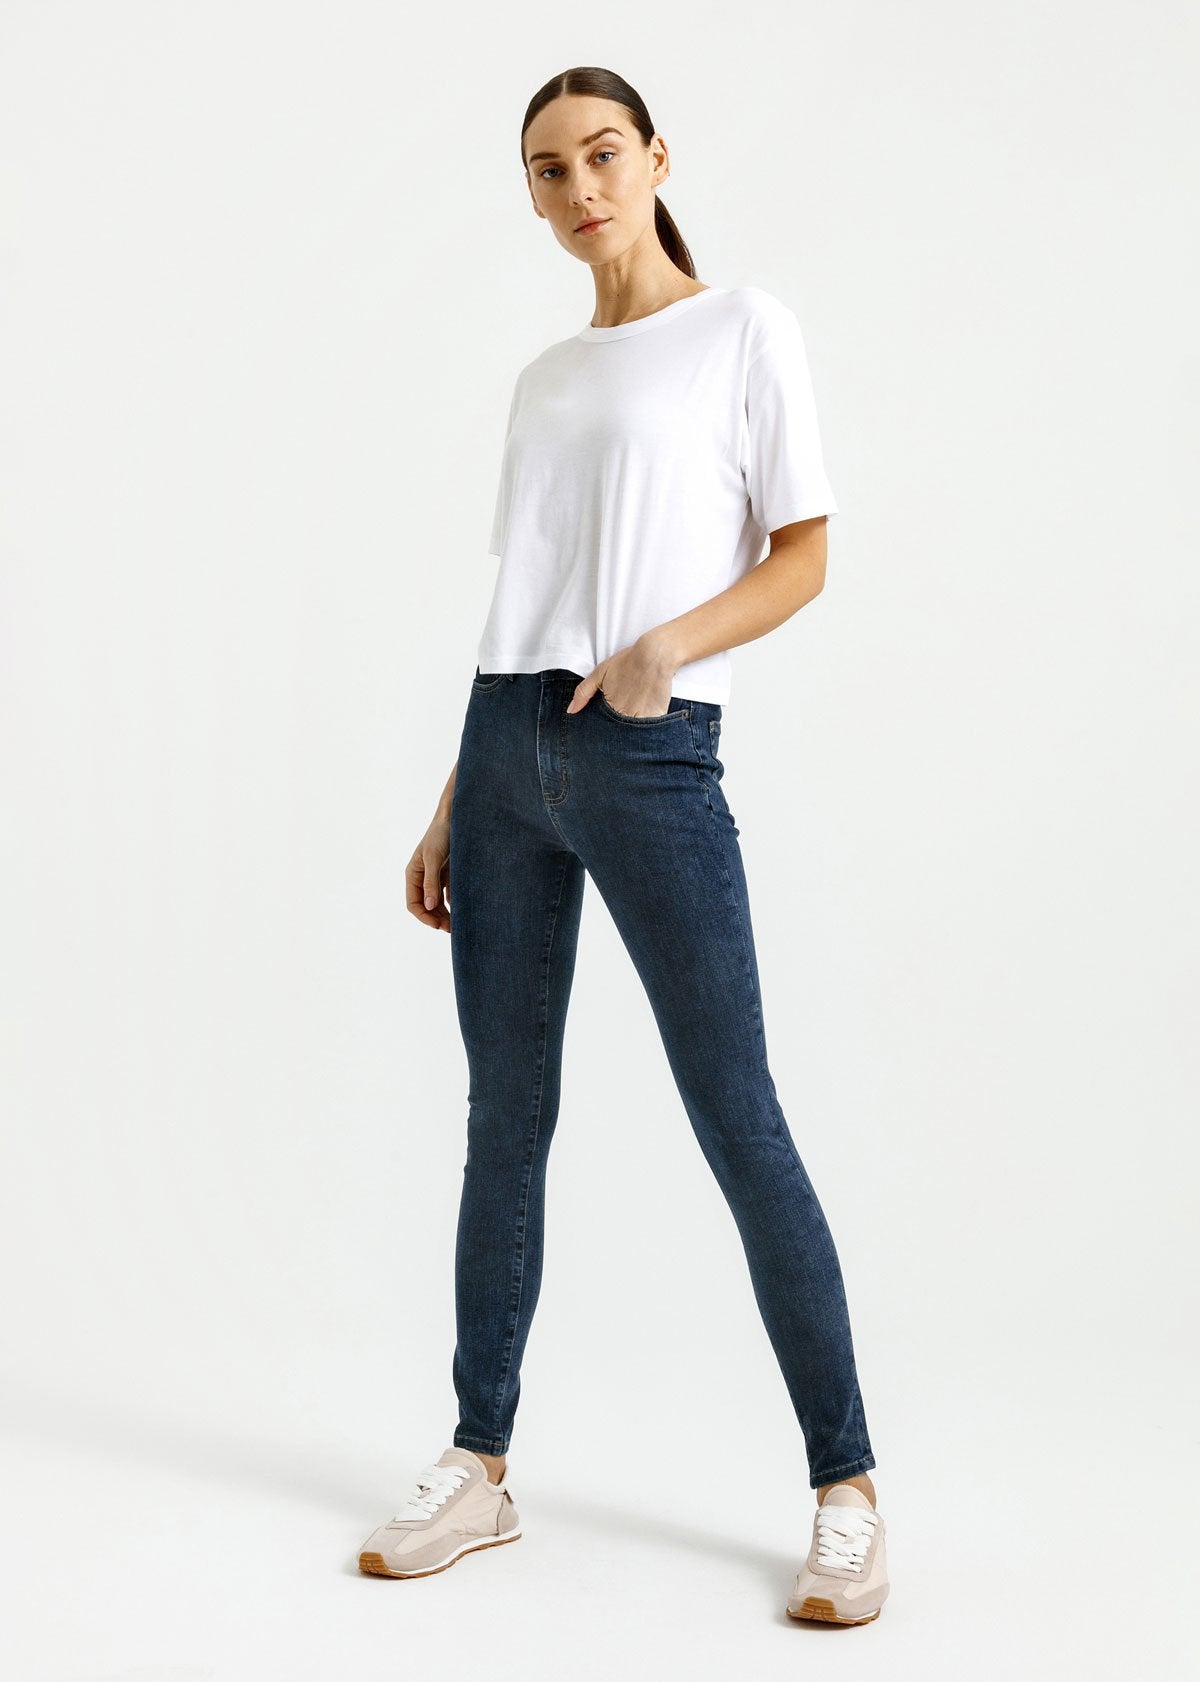 Double Button Ripped Skinny Jeans, High Rise Washed Blue Stretchy Denim  Pants, Women's Denim Jeans & Clothing